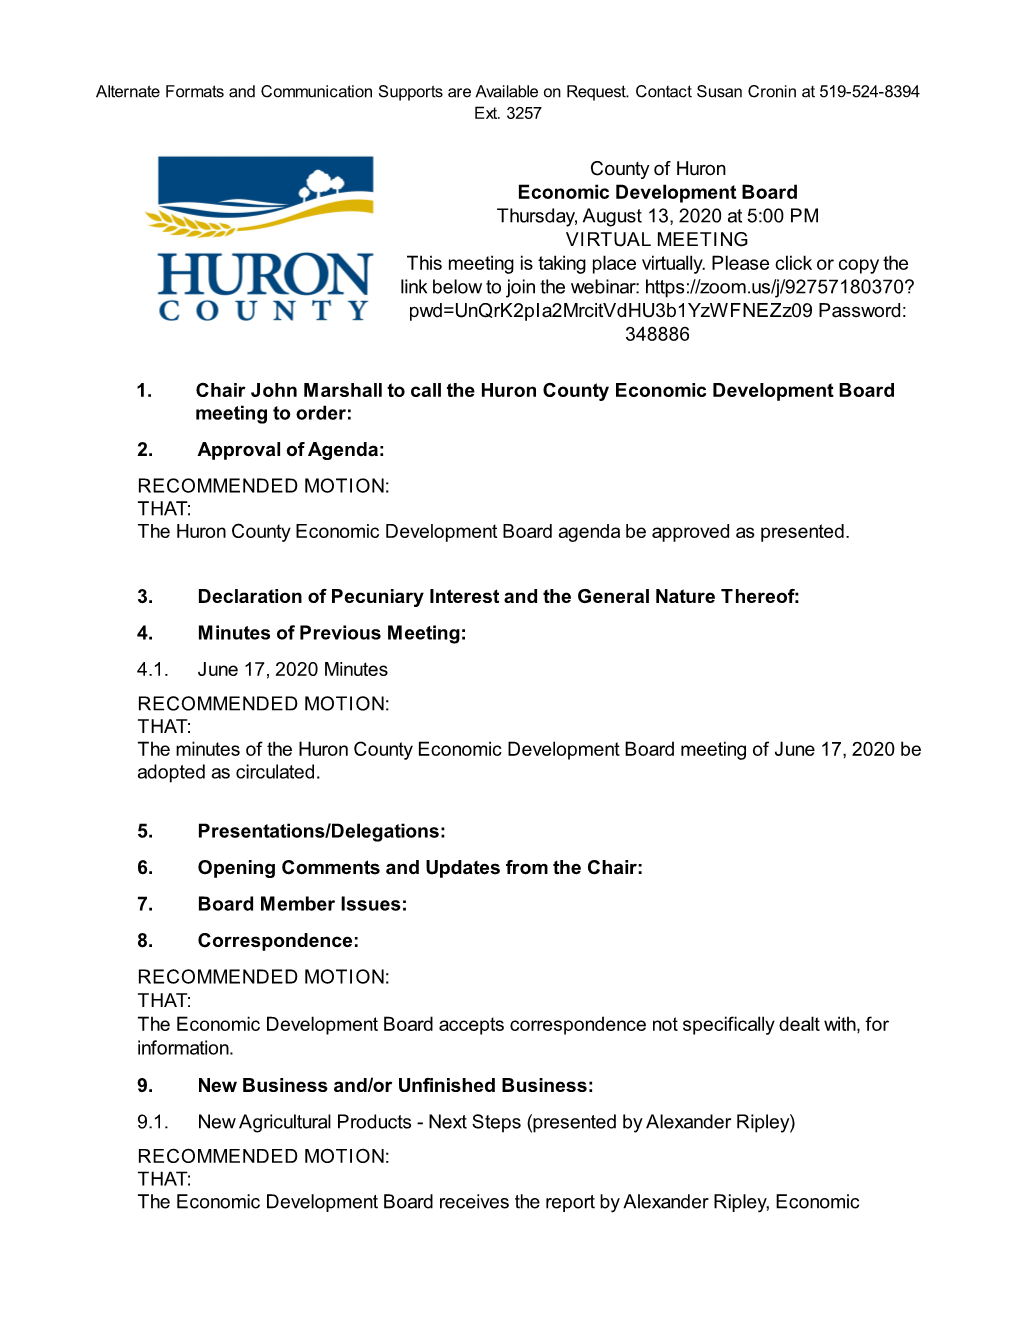 County of Huron Economic Development Board Thursday, August 13, 2020 at 5:00 PM VIRTUAL MEETING This Meeting Is Taking Place Virtually